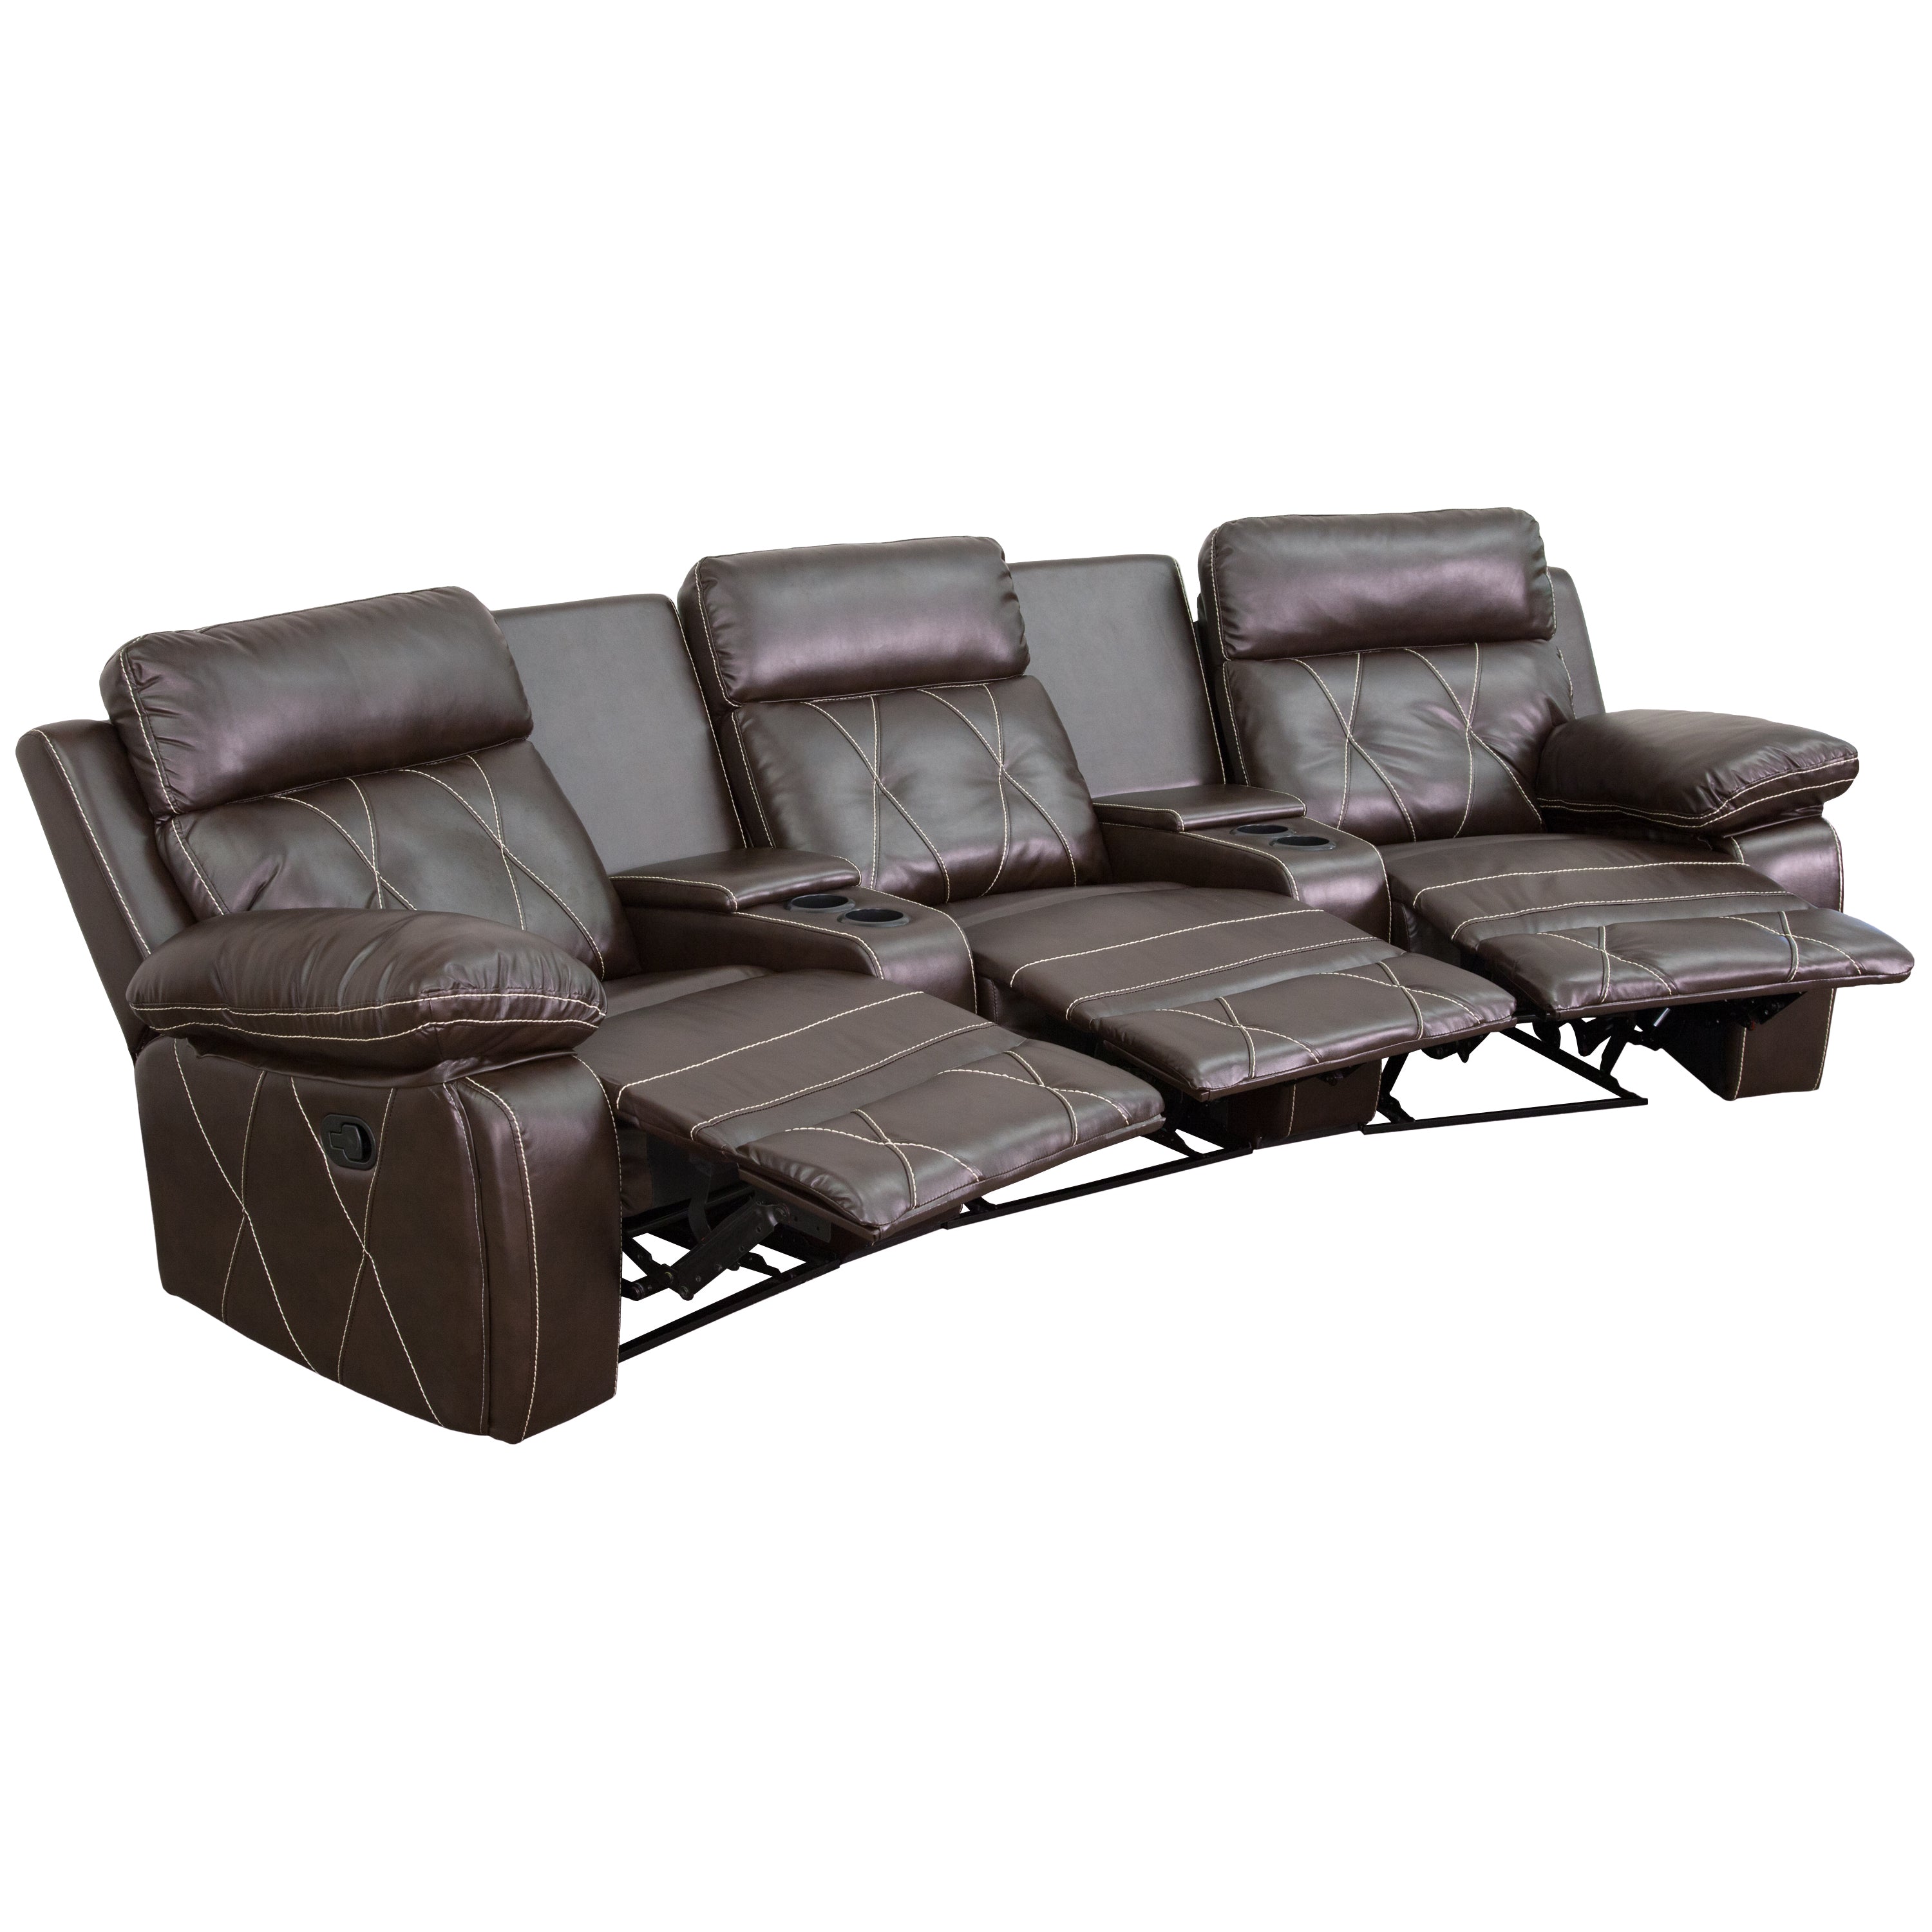 Reel Comfort Series 3-Seat Reclining LeatherSoft Theater Seating Unit with Curved Cup Holders-Theater Seating-Flash Furniture-Wall2Wall Furnishings